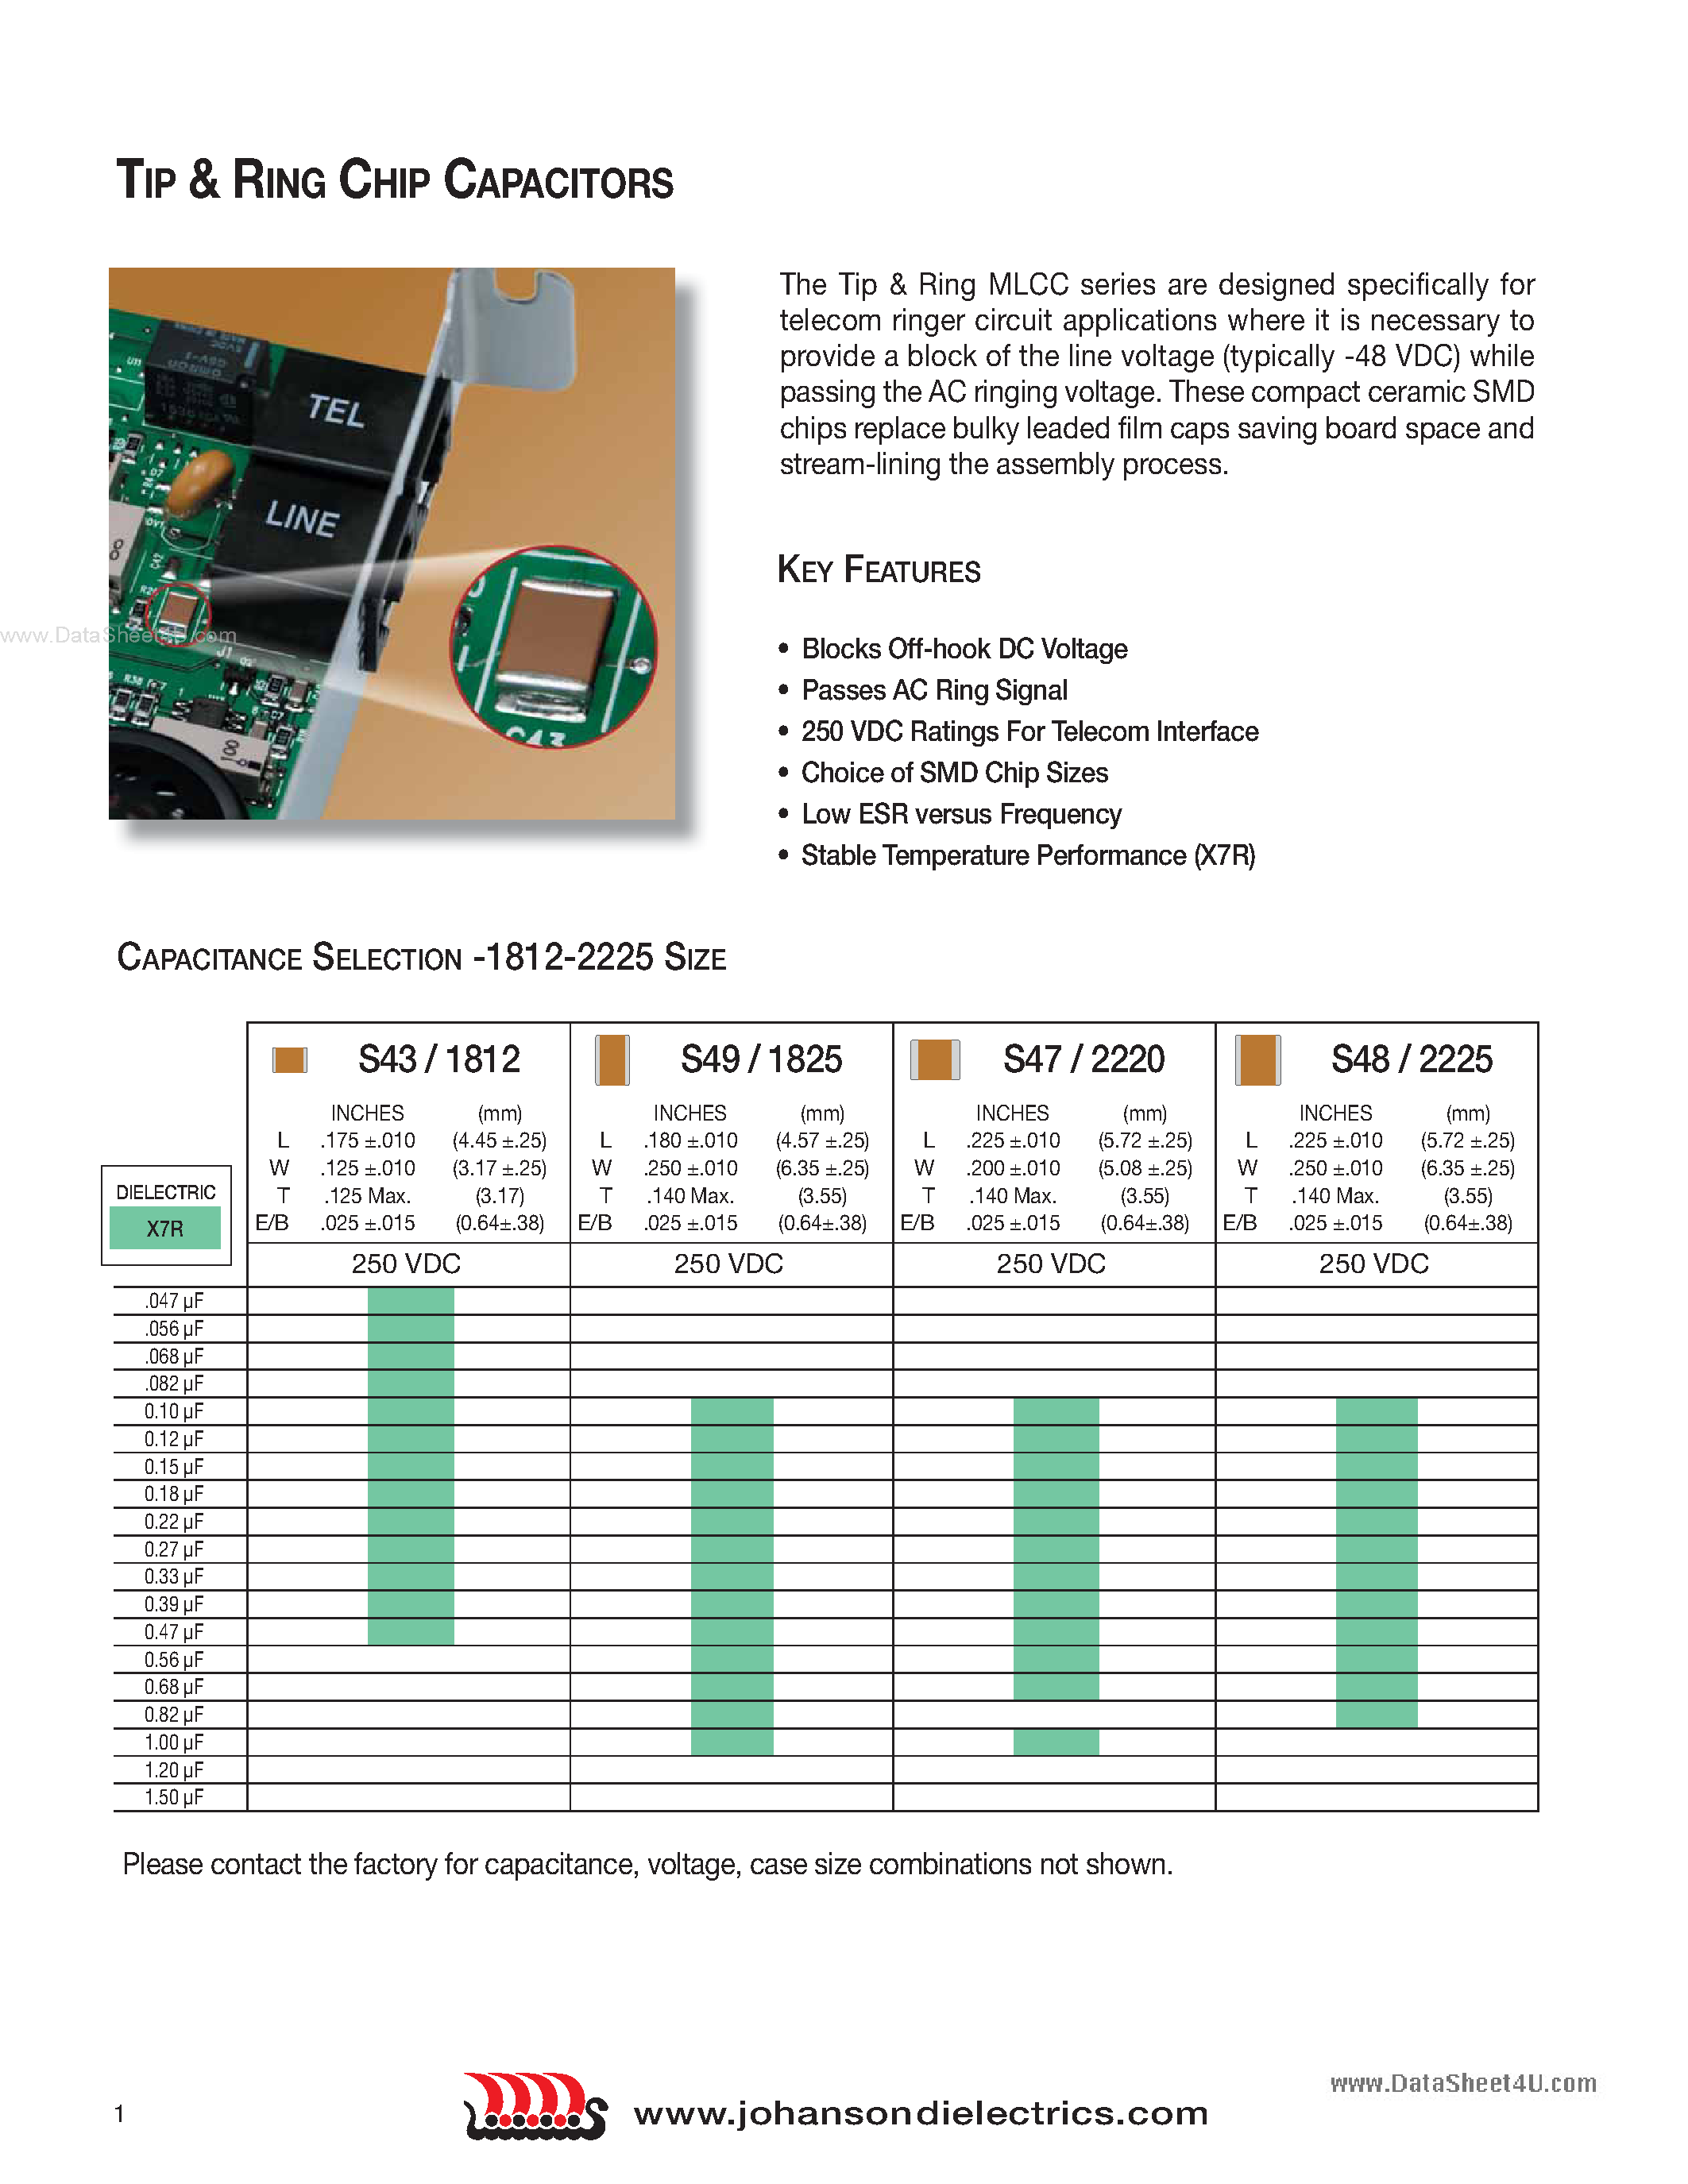 Datasheet 251S4xxx - TIP&RING CHIP CAPACITORS page 1